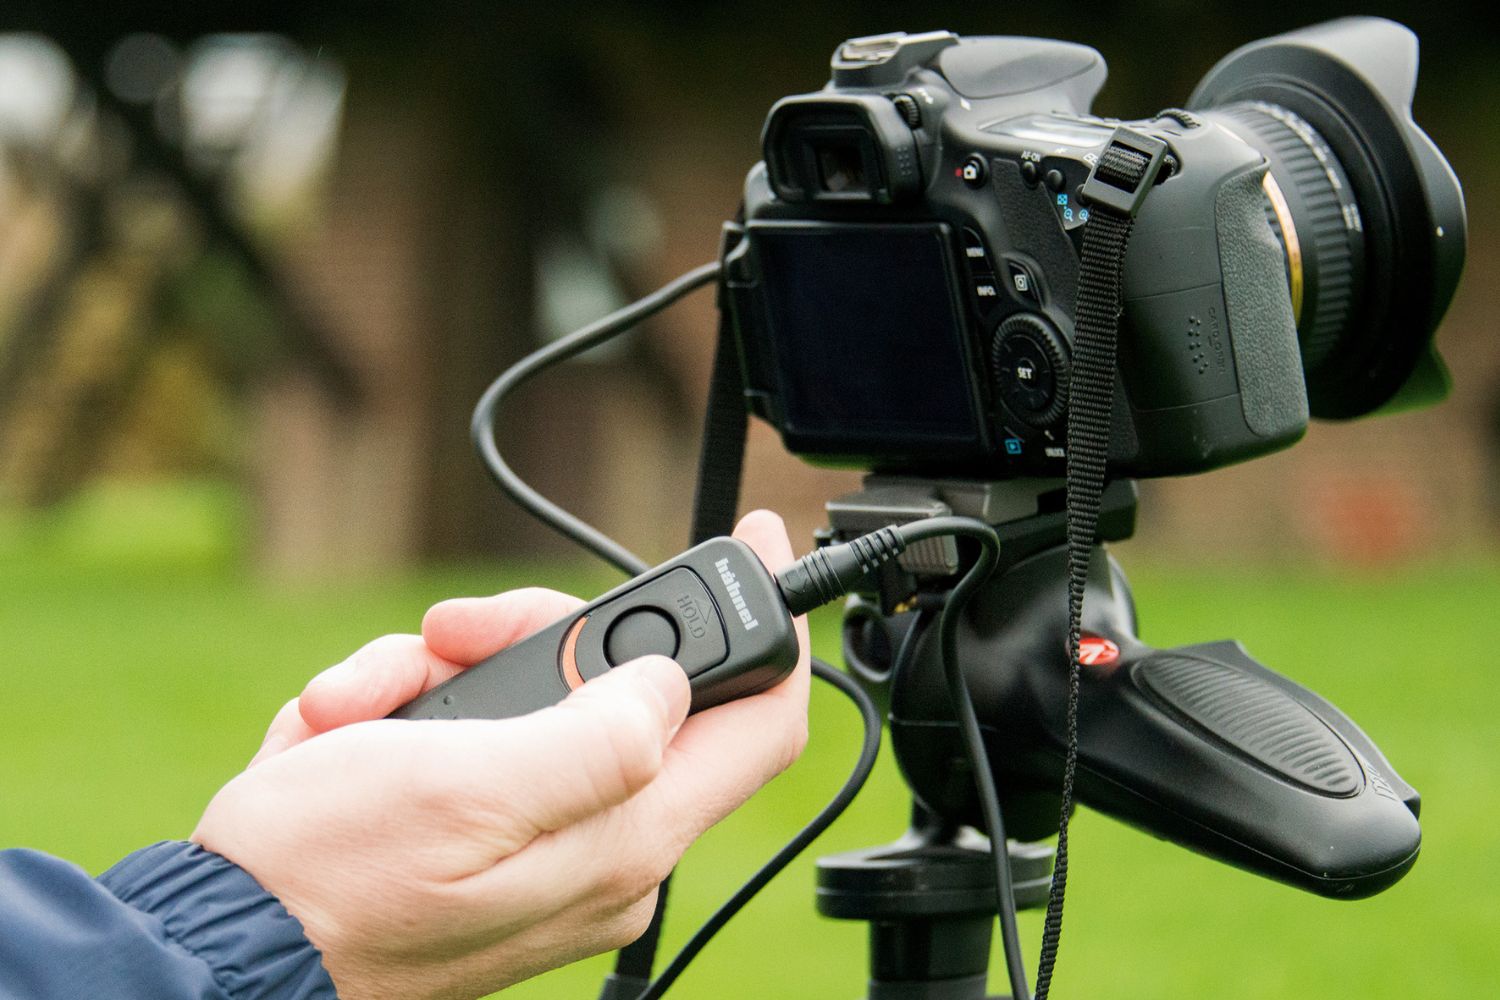 How To Connect A DSLR Camera To A Remote